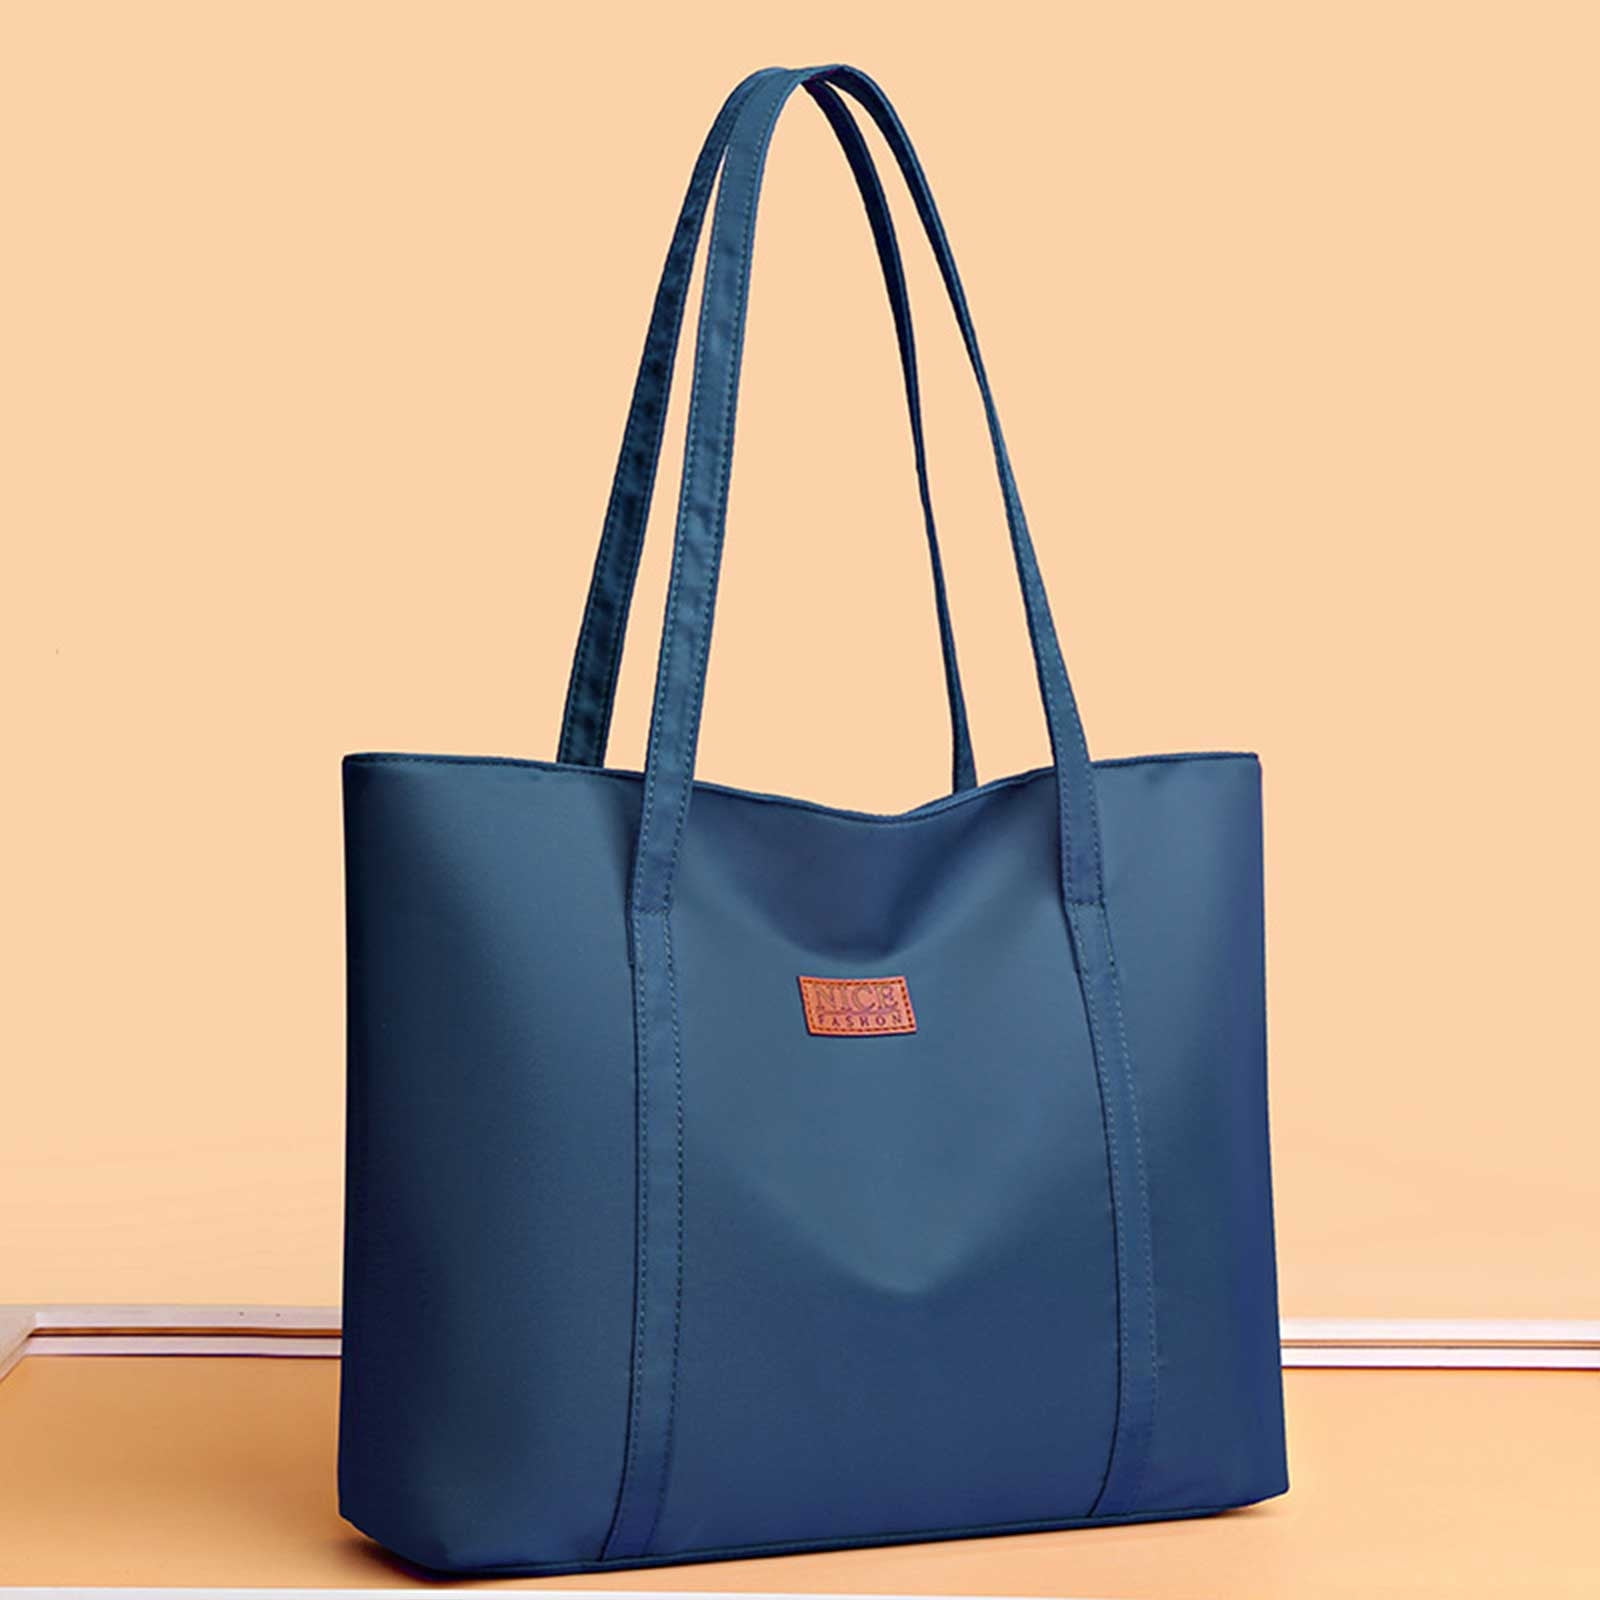 Cute and Quirky: Adorable Women's Bags with Playful Designs